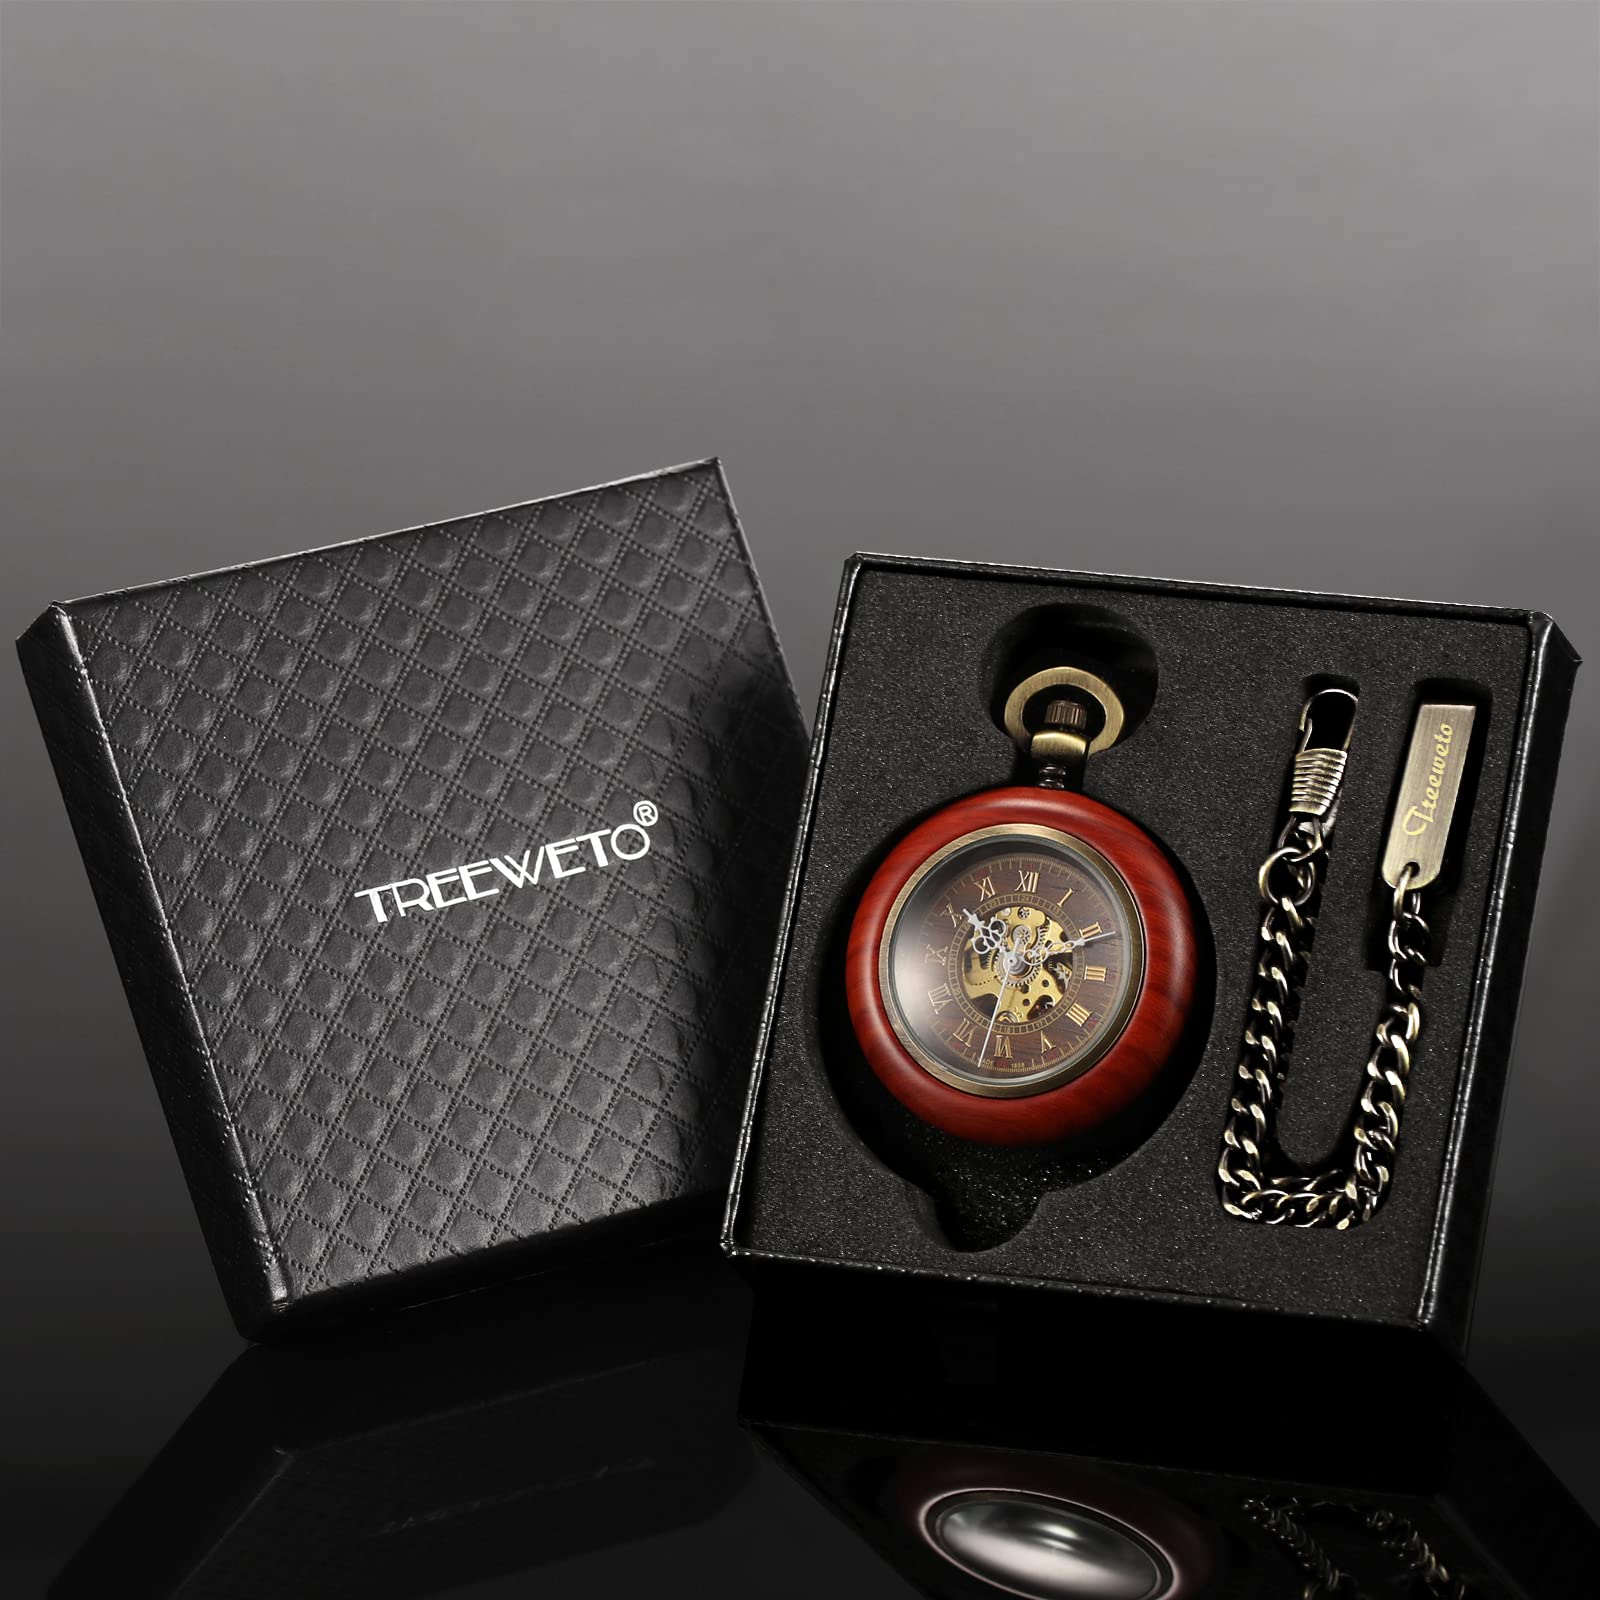 TREEWETO Vintage Wood Mechanical Pocket Watch for Men Women Steampunk Skeleton Dial with Chain + Box